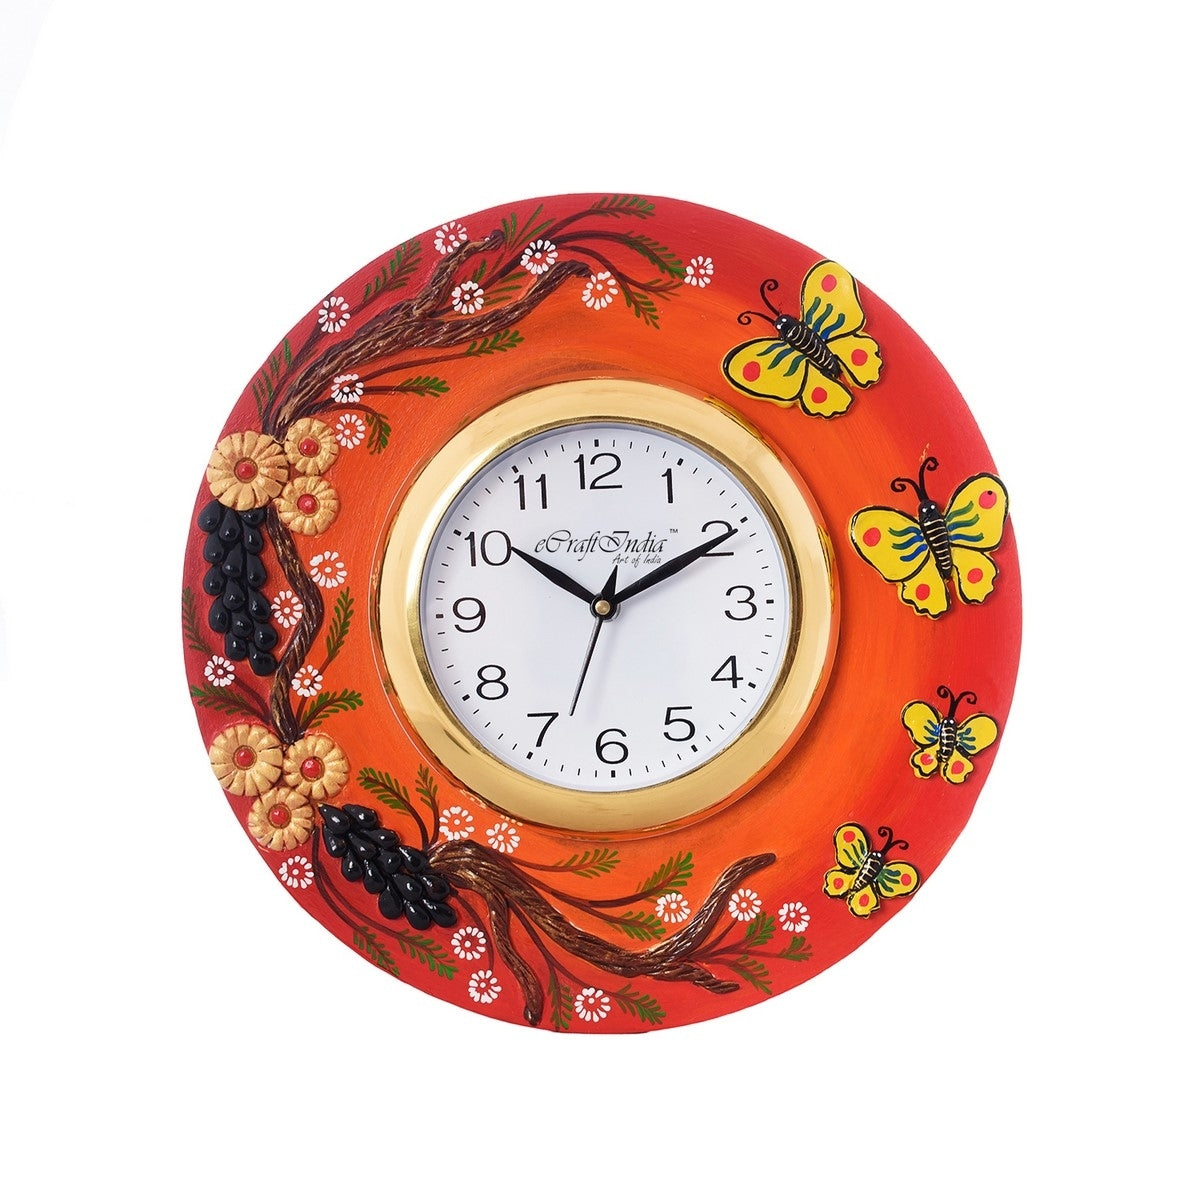 Butterfuly and Garden View Papier-Mache Wooden Handcrafted Wall Clock